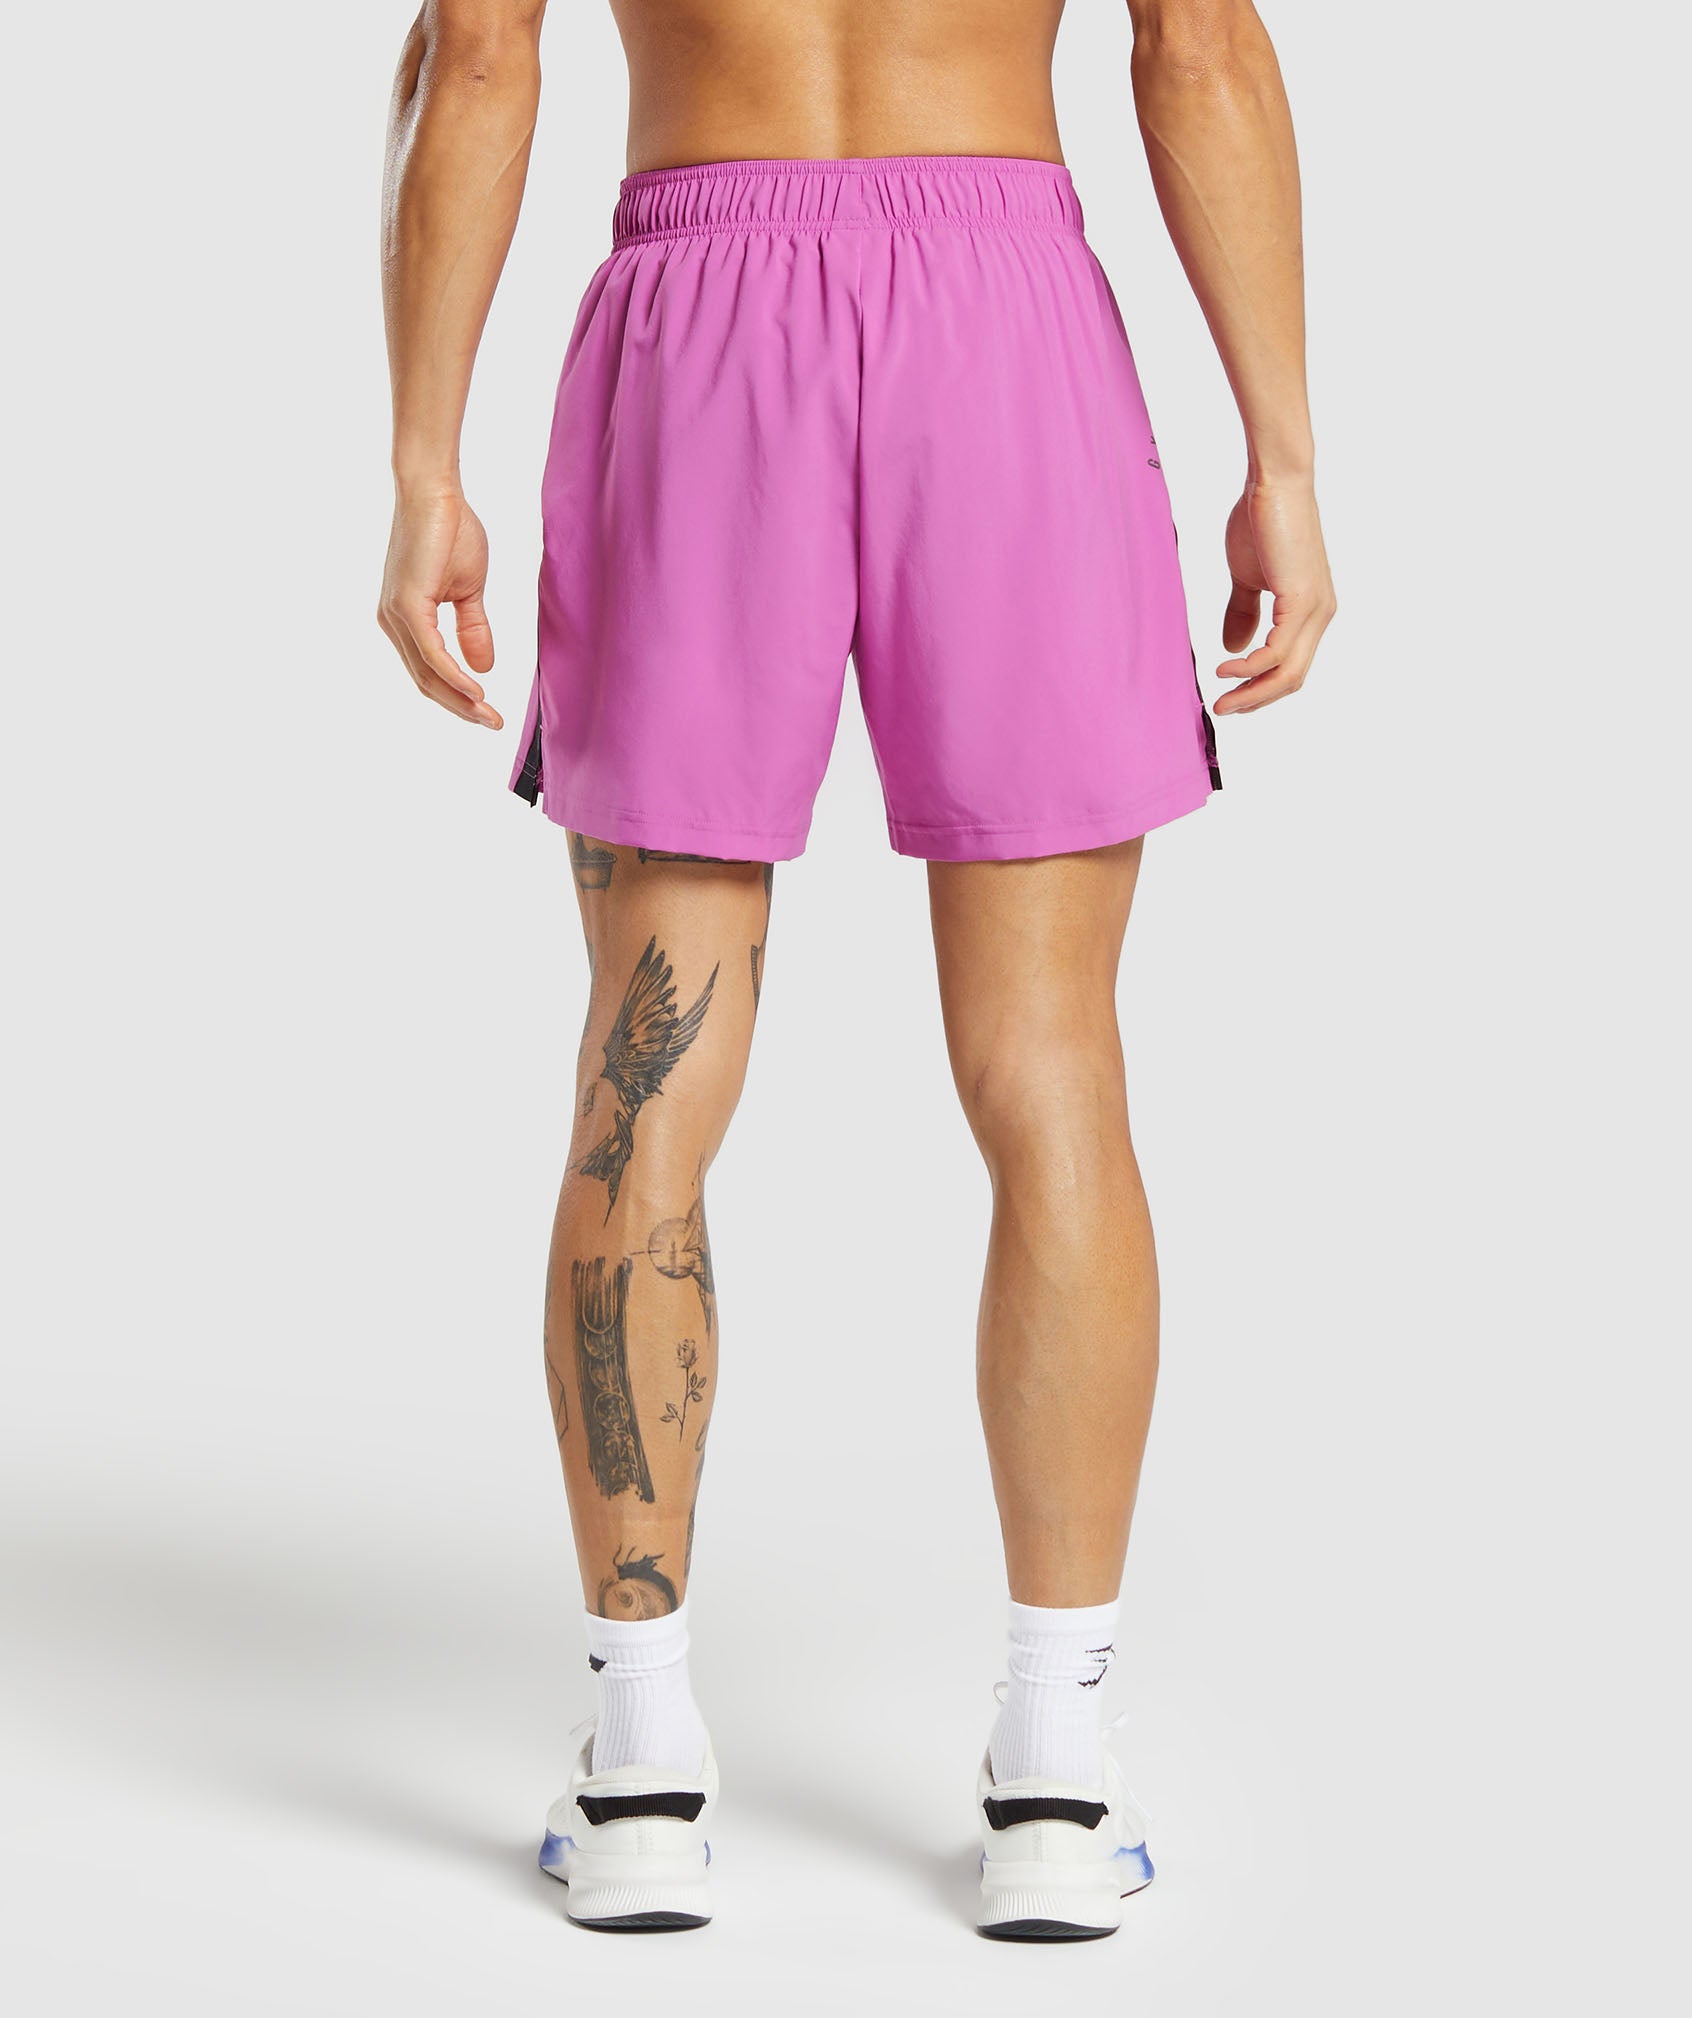 Sport  7" Short in Shelly Pink/Black - view 2